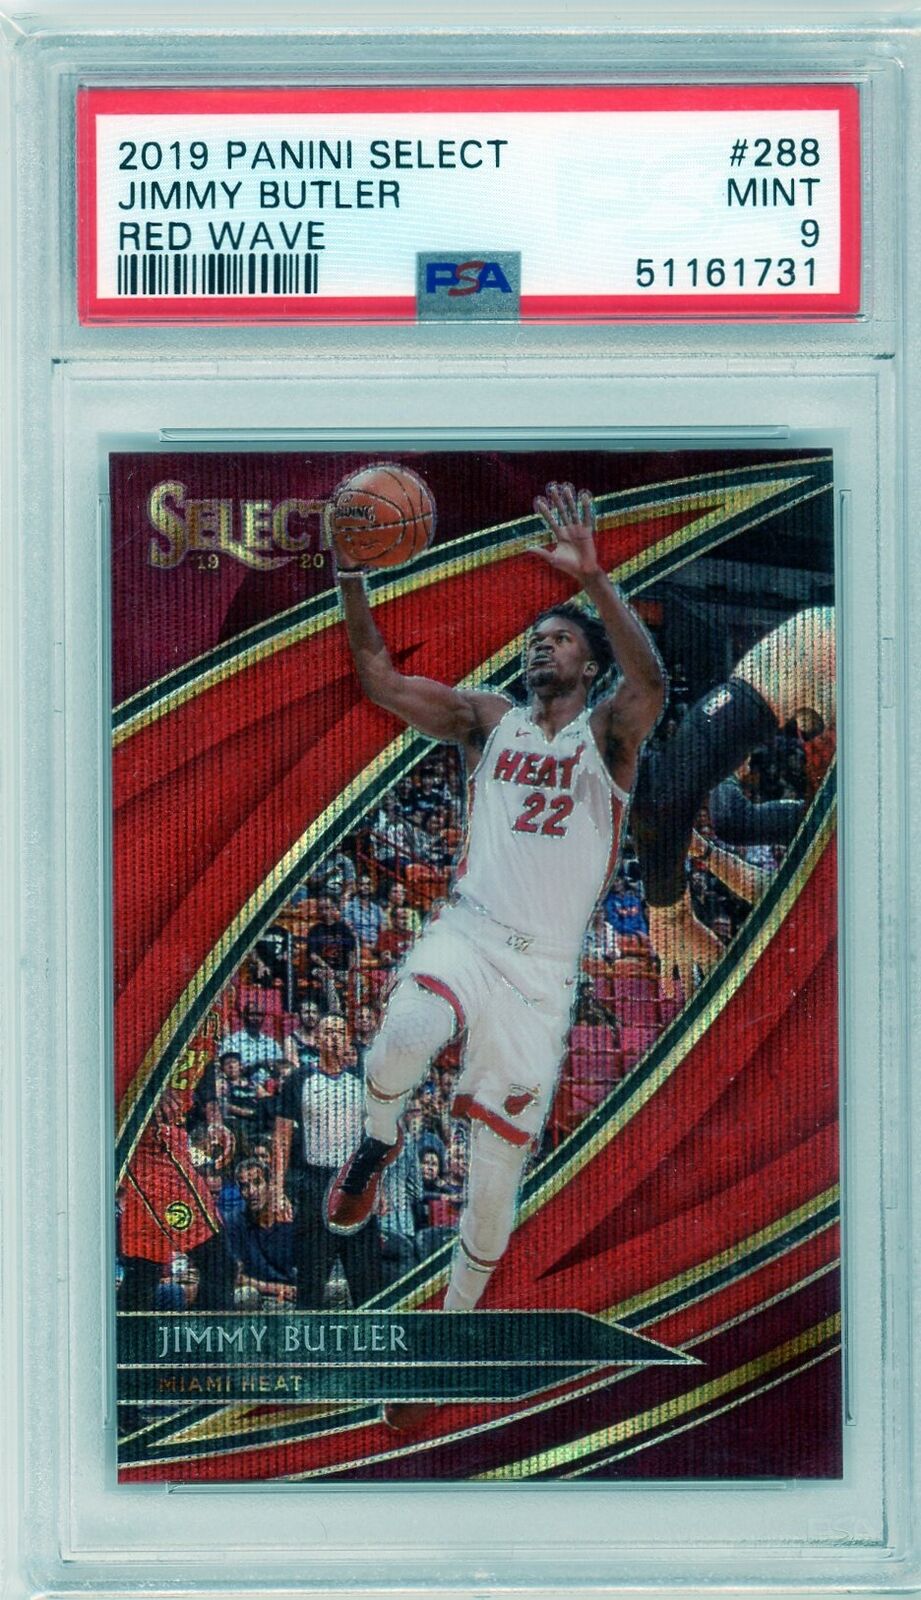 PSA 9 Jimmy Butler // 2019 Panini Select // Red Wave